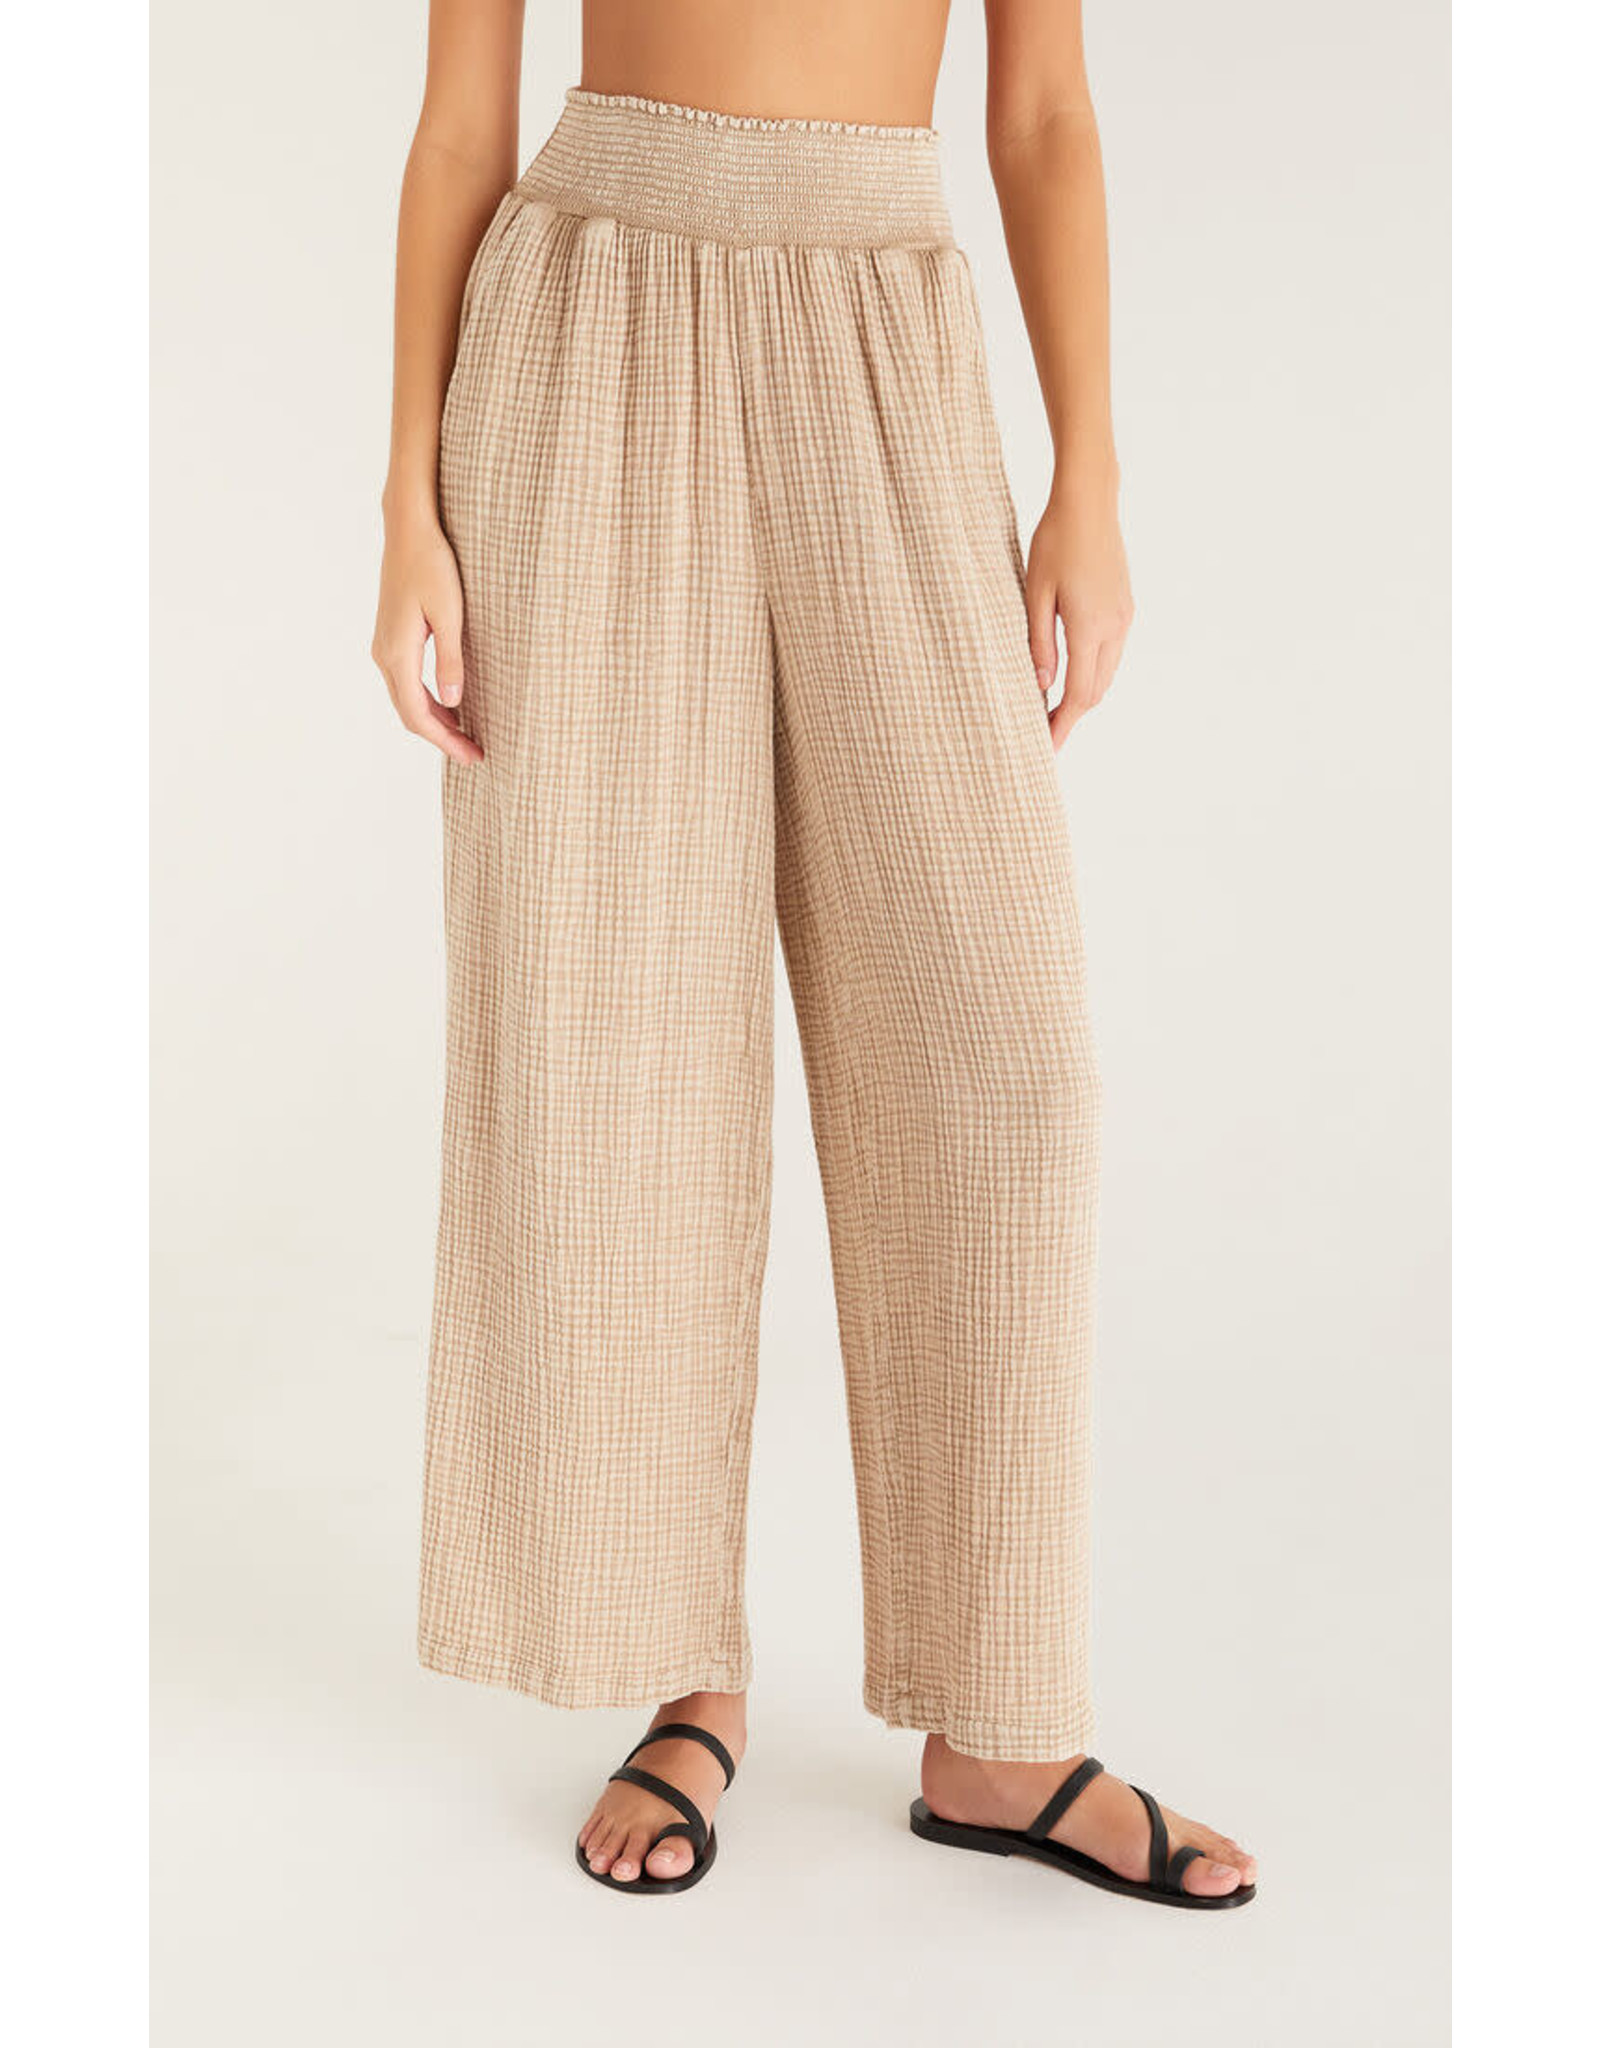 Z supply ZS Cassidy Full Length Pant